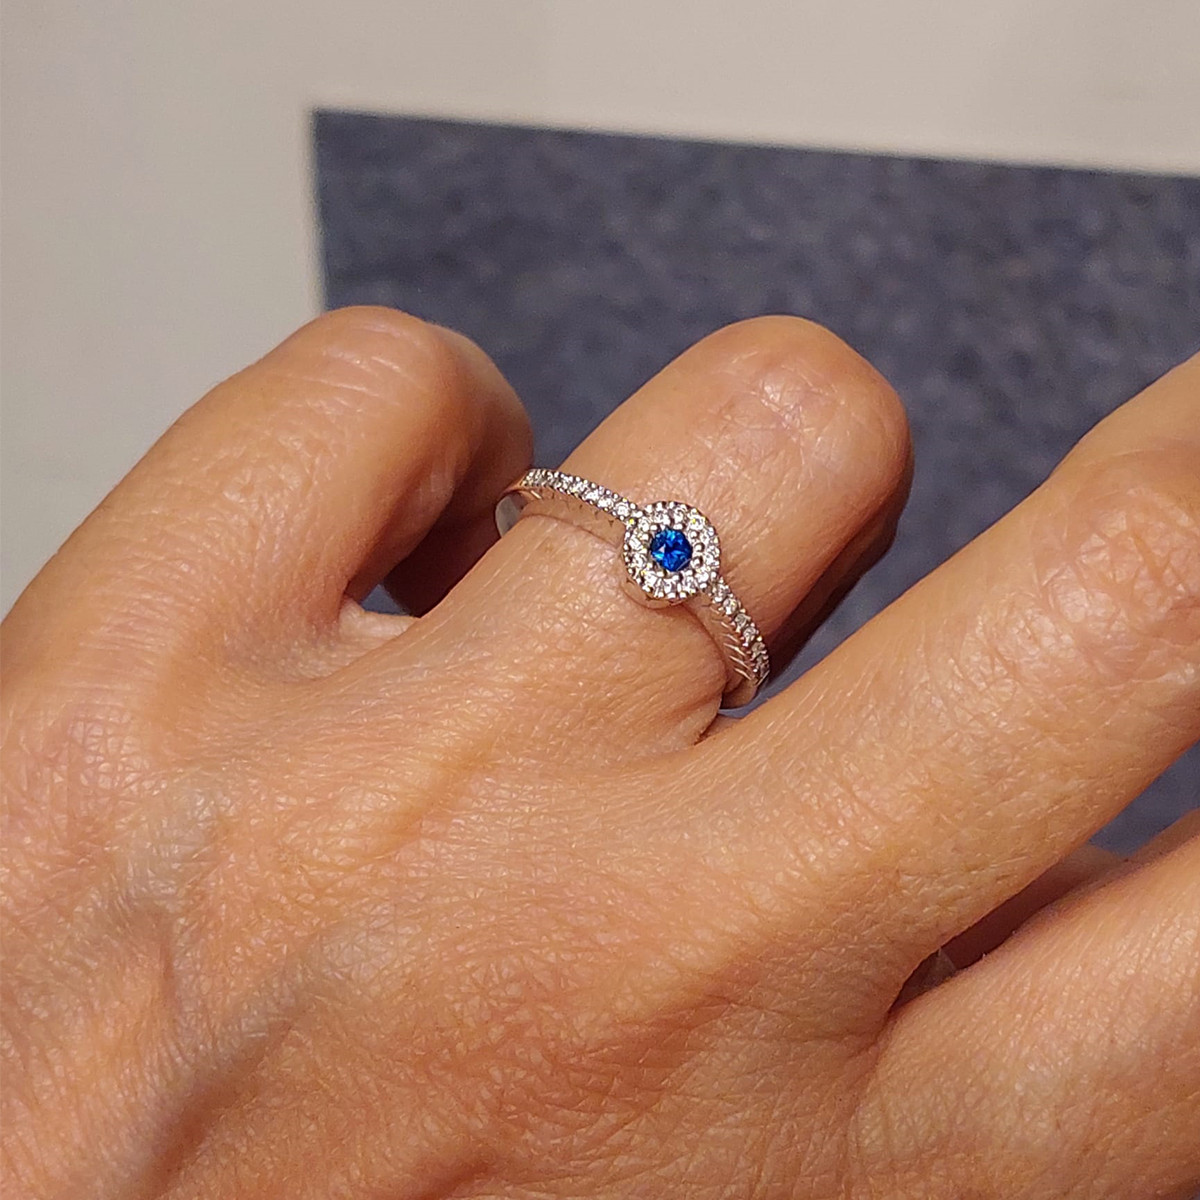 FINE RING WITH DIAMONDS AND BLUE STONE